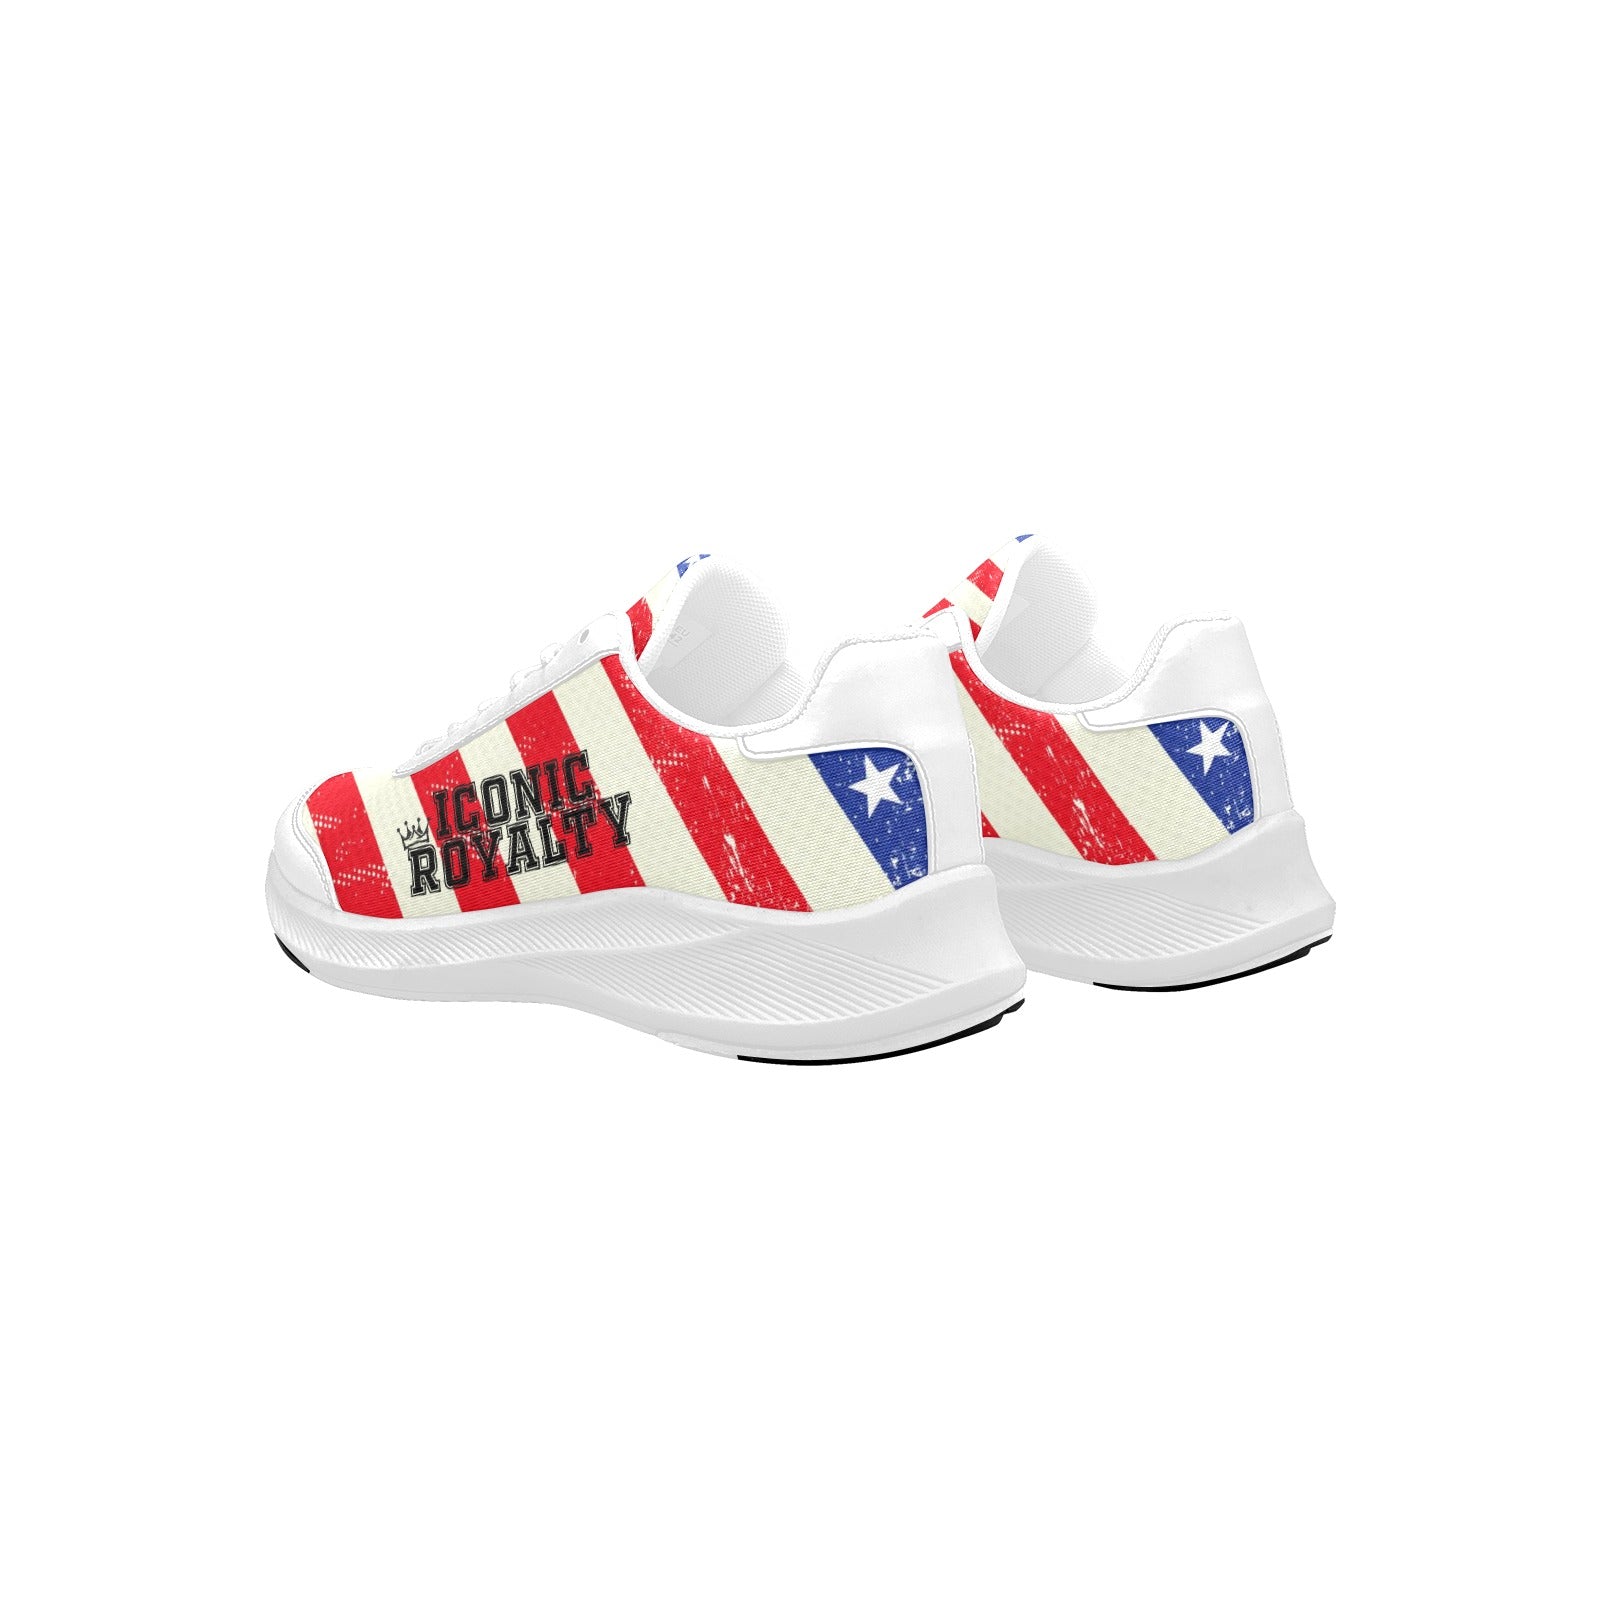 Iconic Royalty American Flag Mudguard Running Shoes